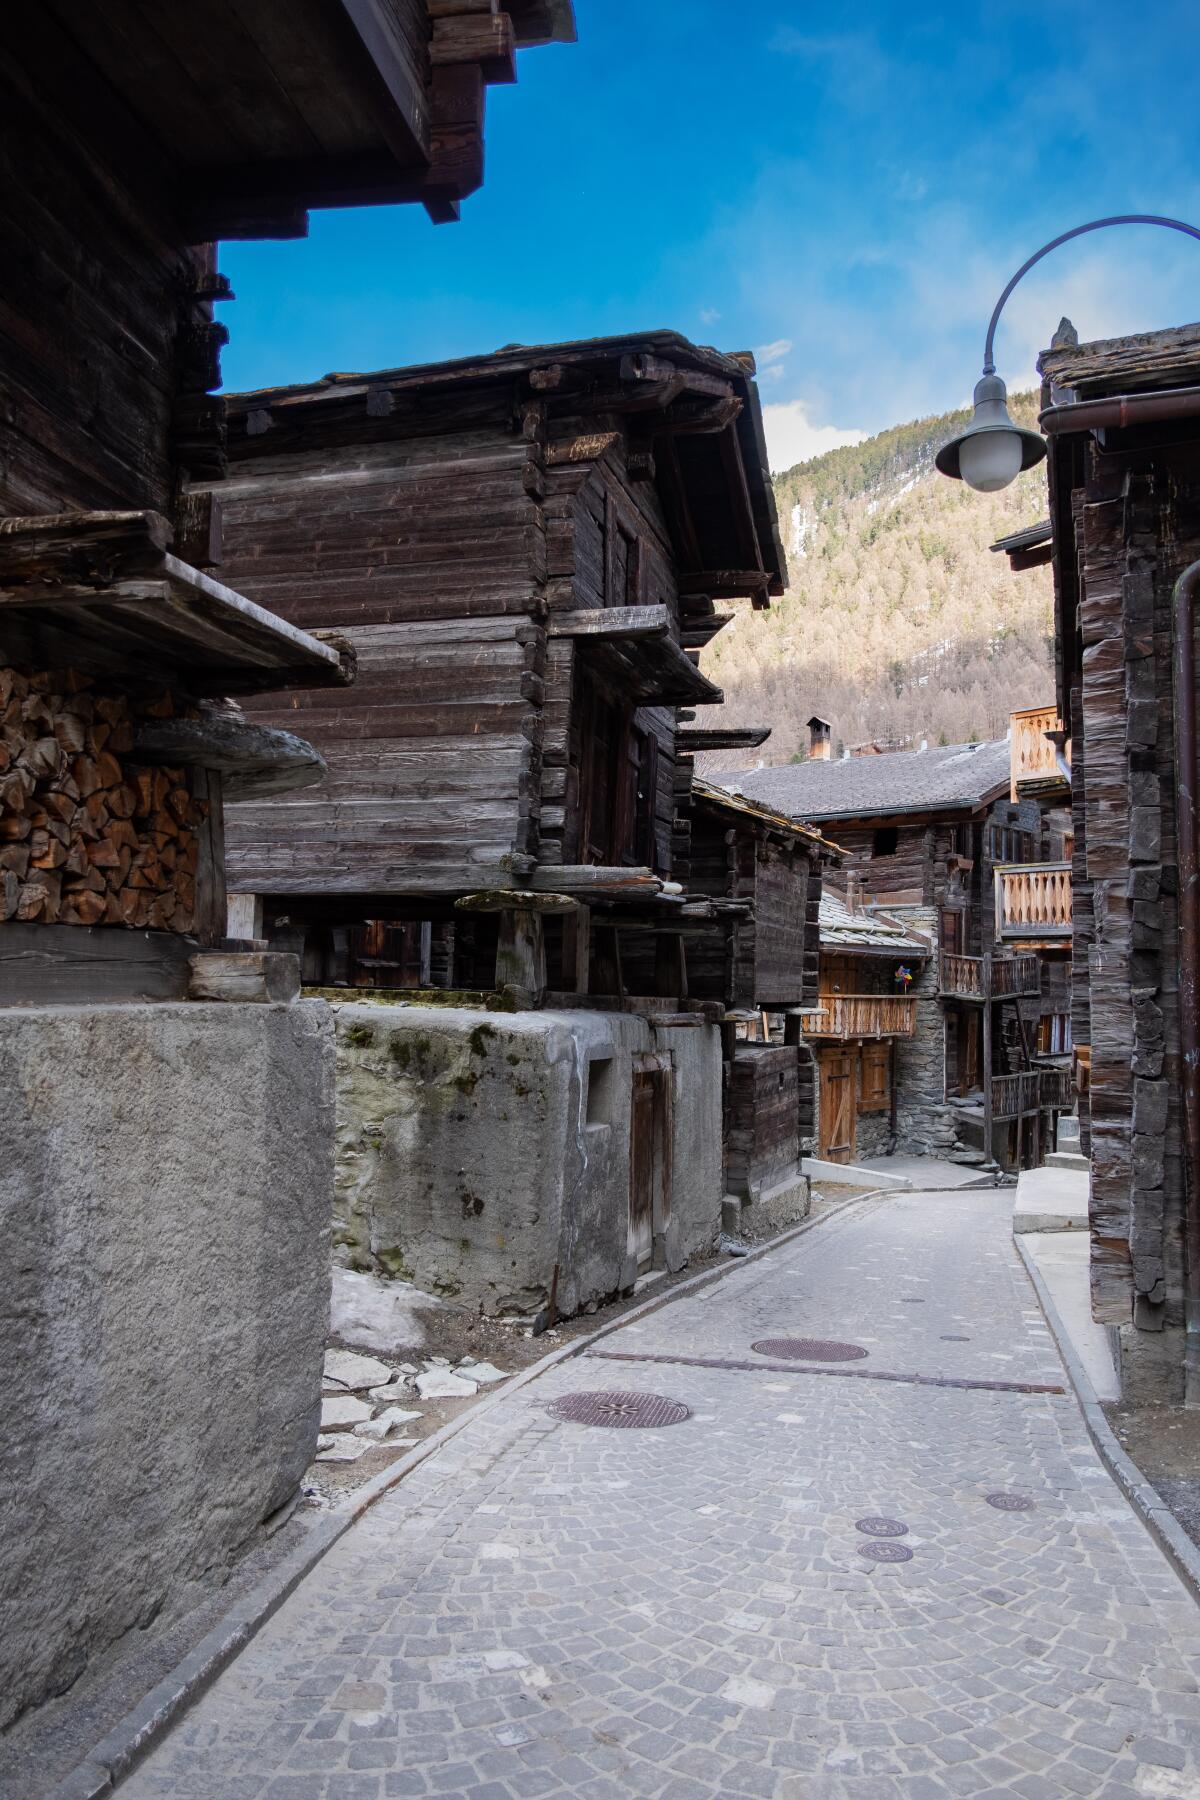 Dating to the 16th century, the historic zone of “Hinterdorf” is a top attraction in Zermatt.